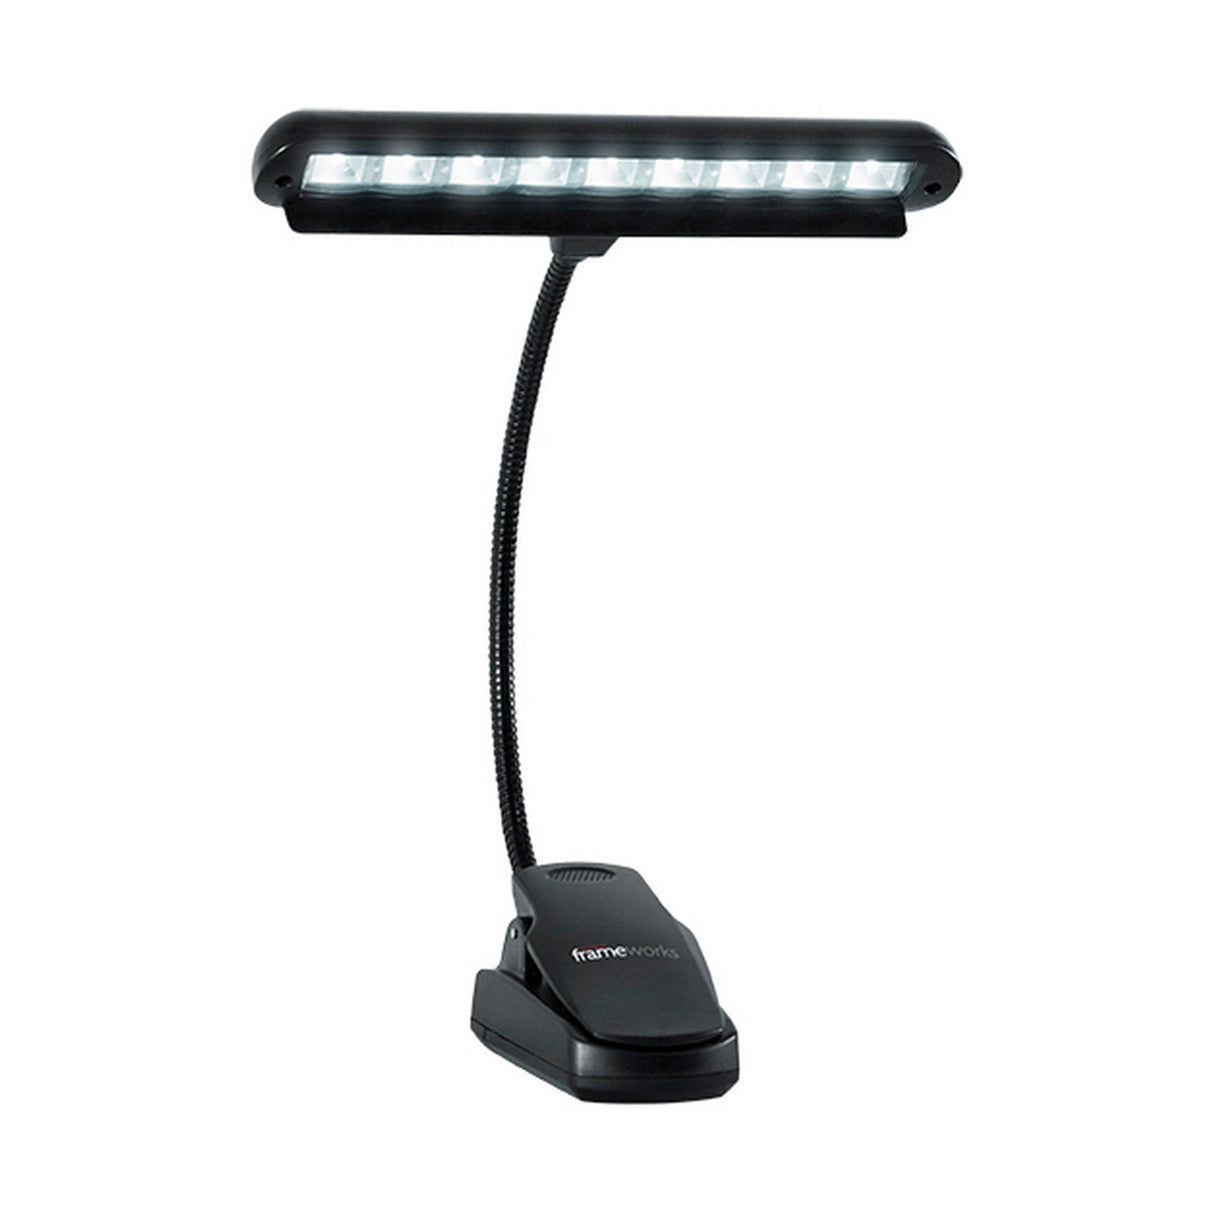 Gator GFW-MUS-LED LED Lamp for Music Stands